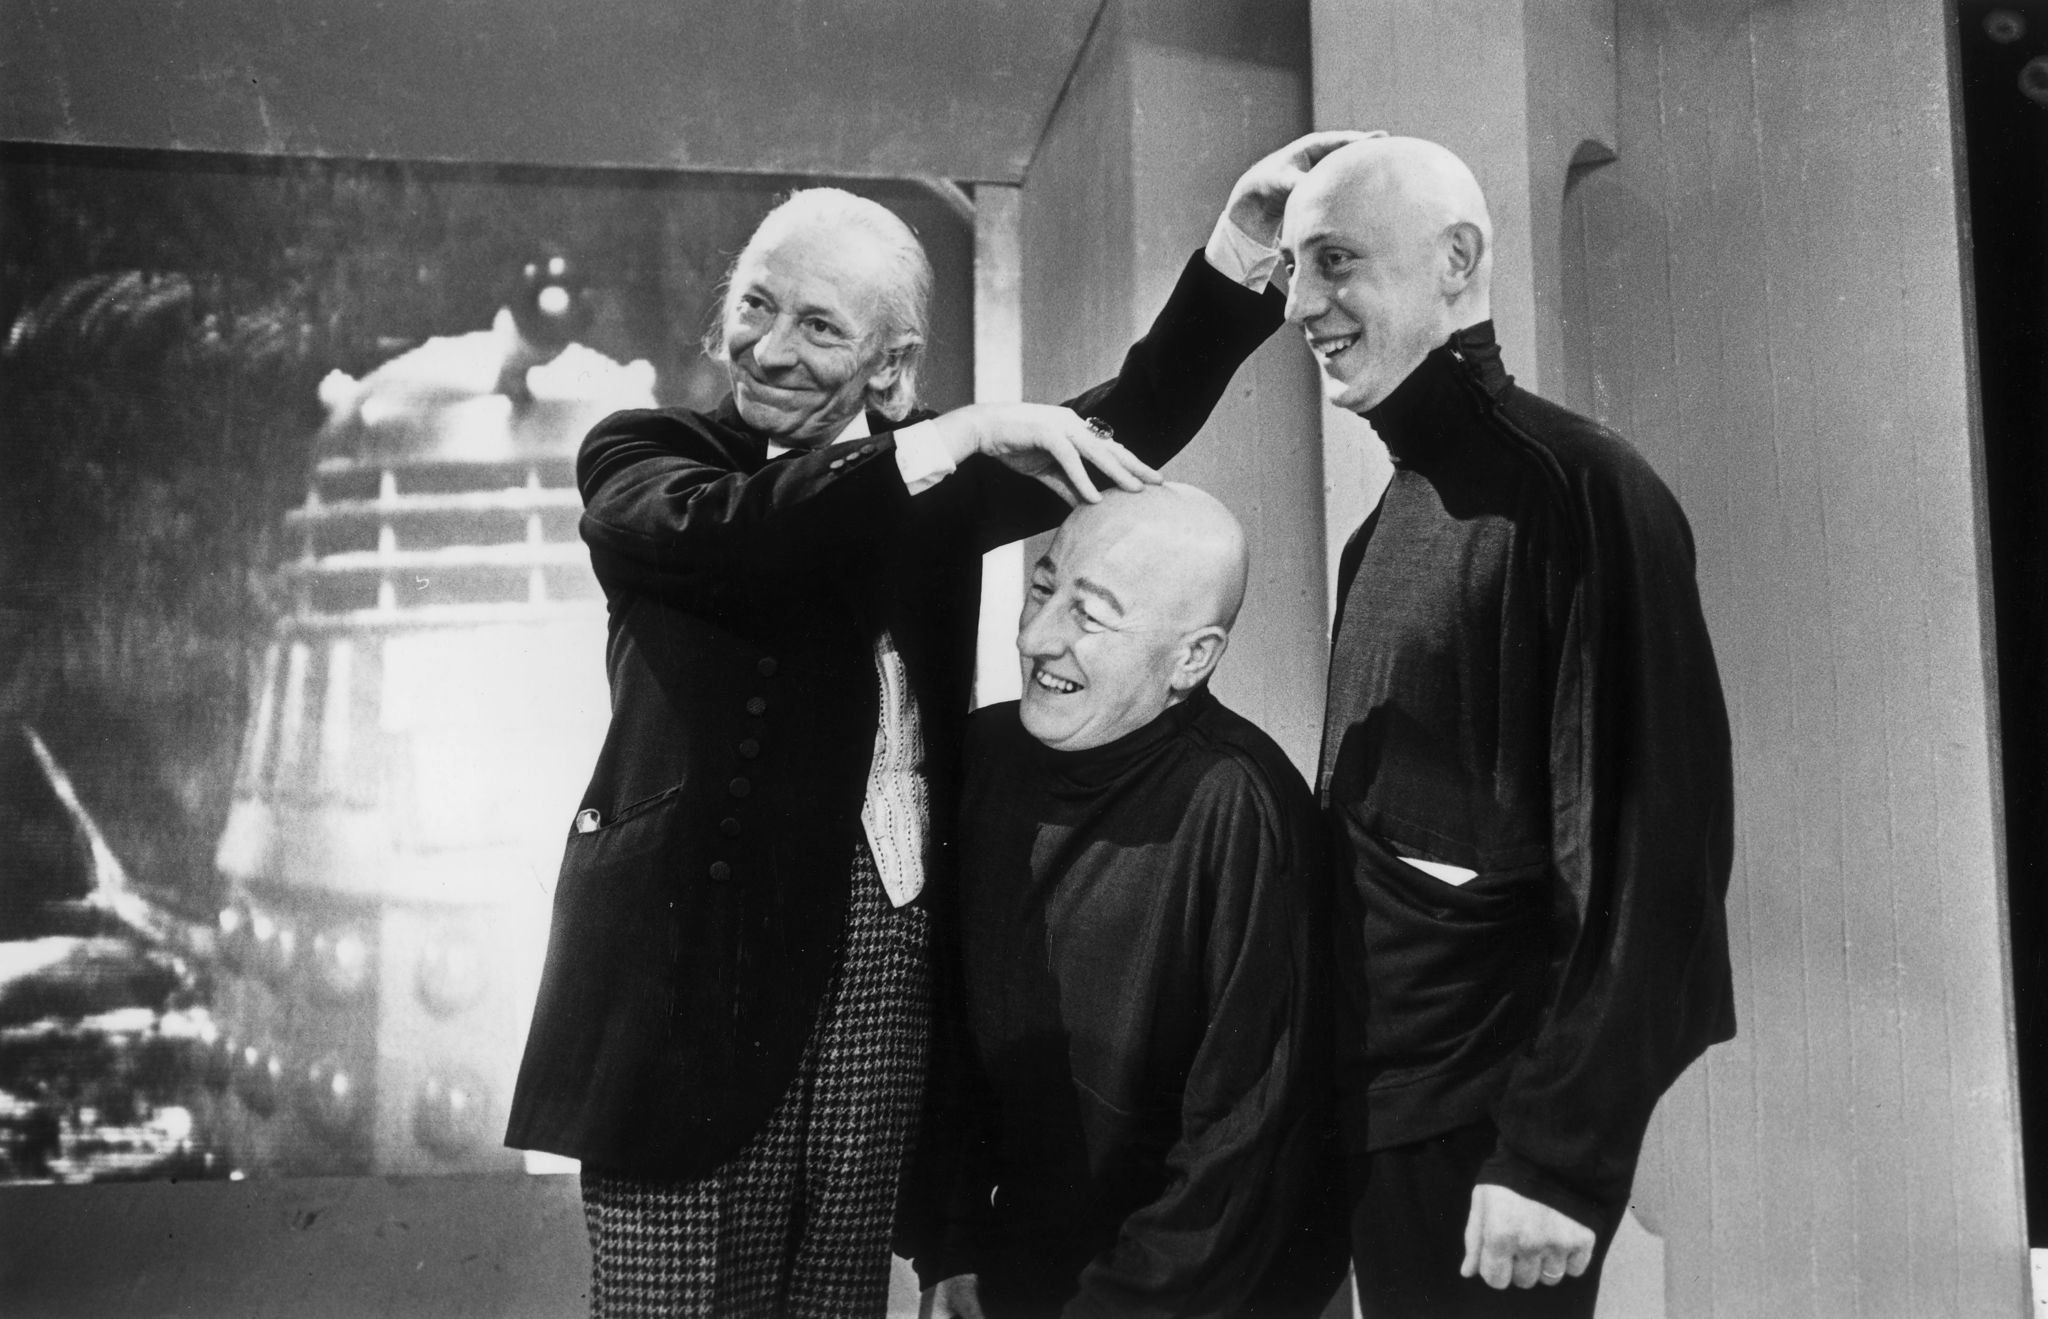 1965: William Hartnell (1908 - 1975), the first incarnation of TV's Dr Who, feels the hairless pates of two ticklish co-stars. They are appearing as the Teknix, bald mutated humans employed in Space Security.